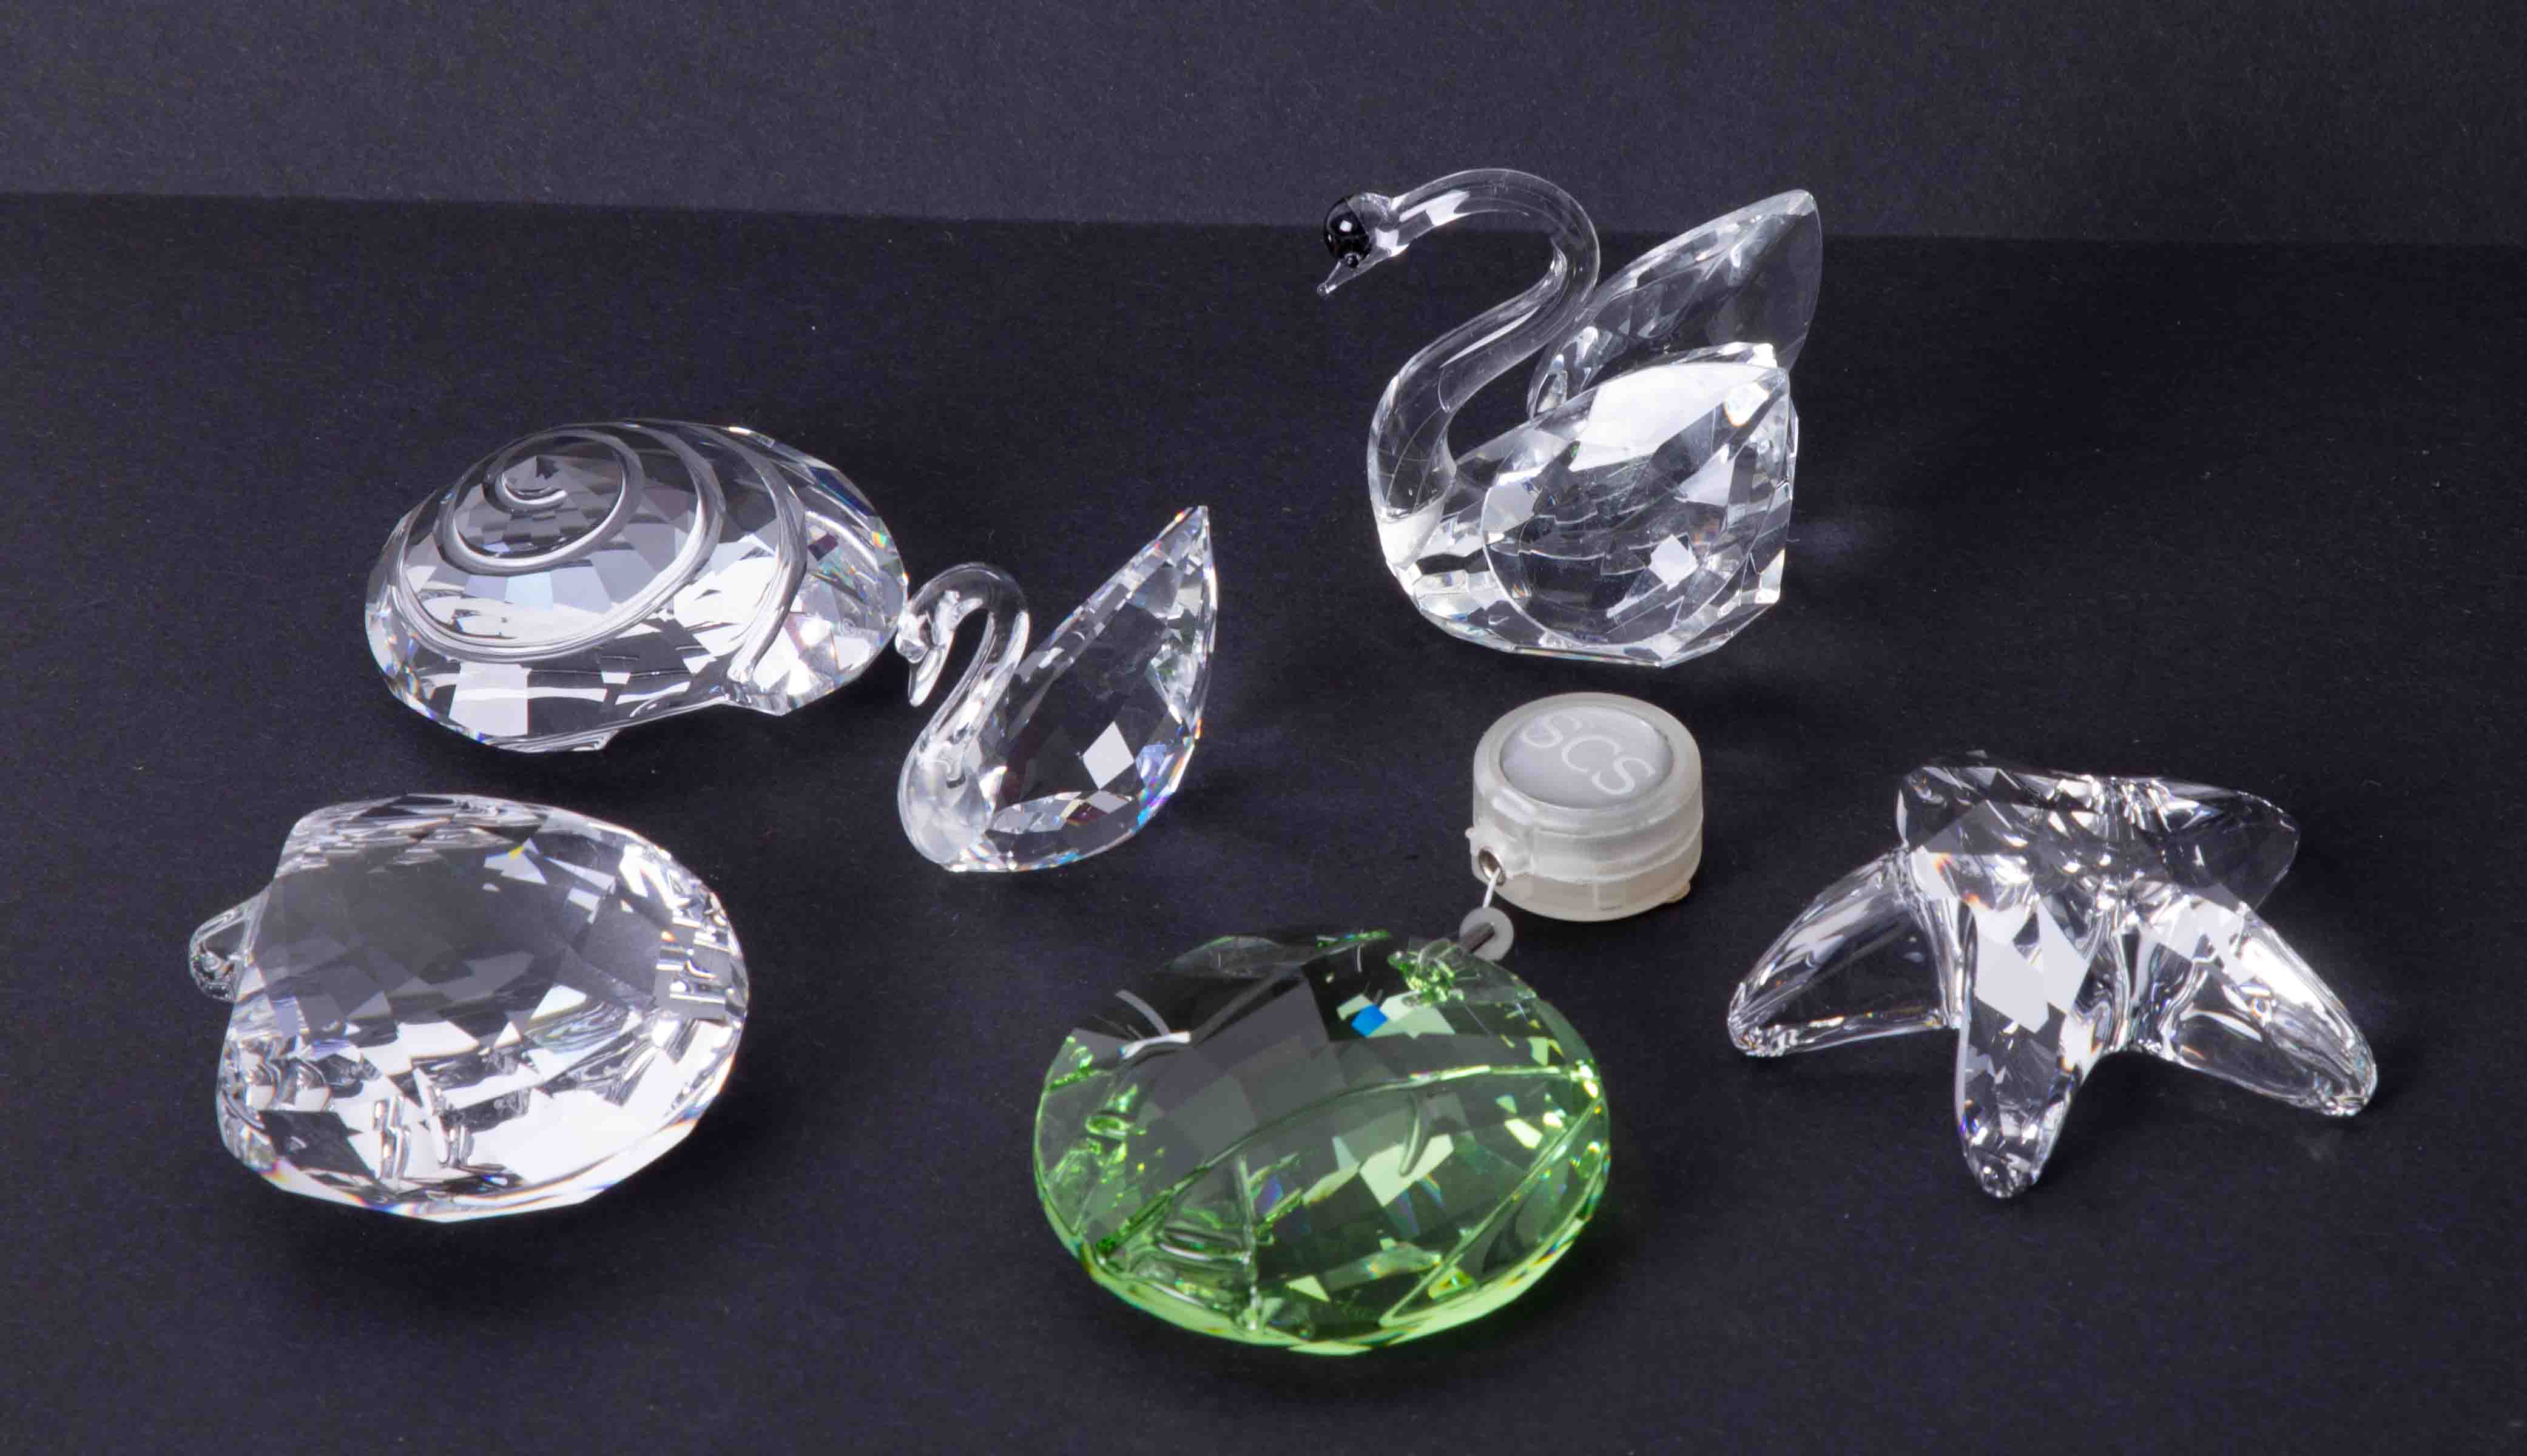 Swarovski Crystal Glass, mixed collection including two small Swans, Shell, Starfish and Window